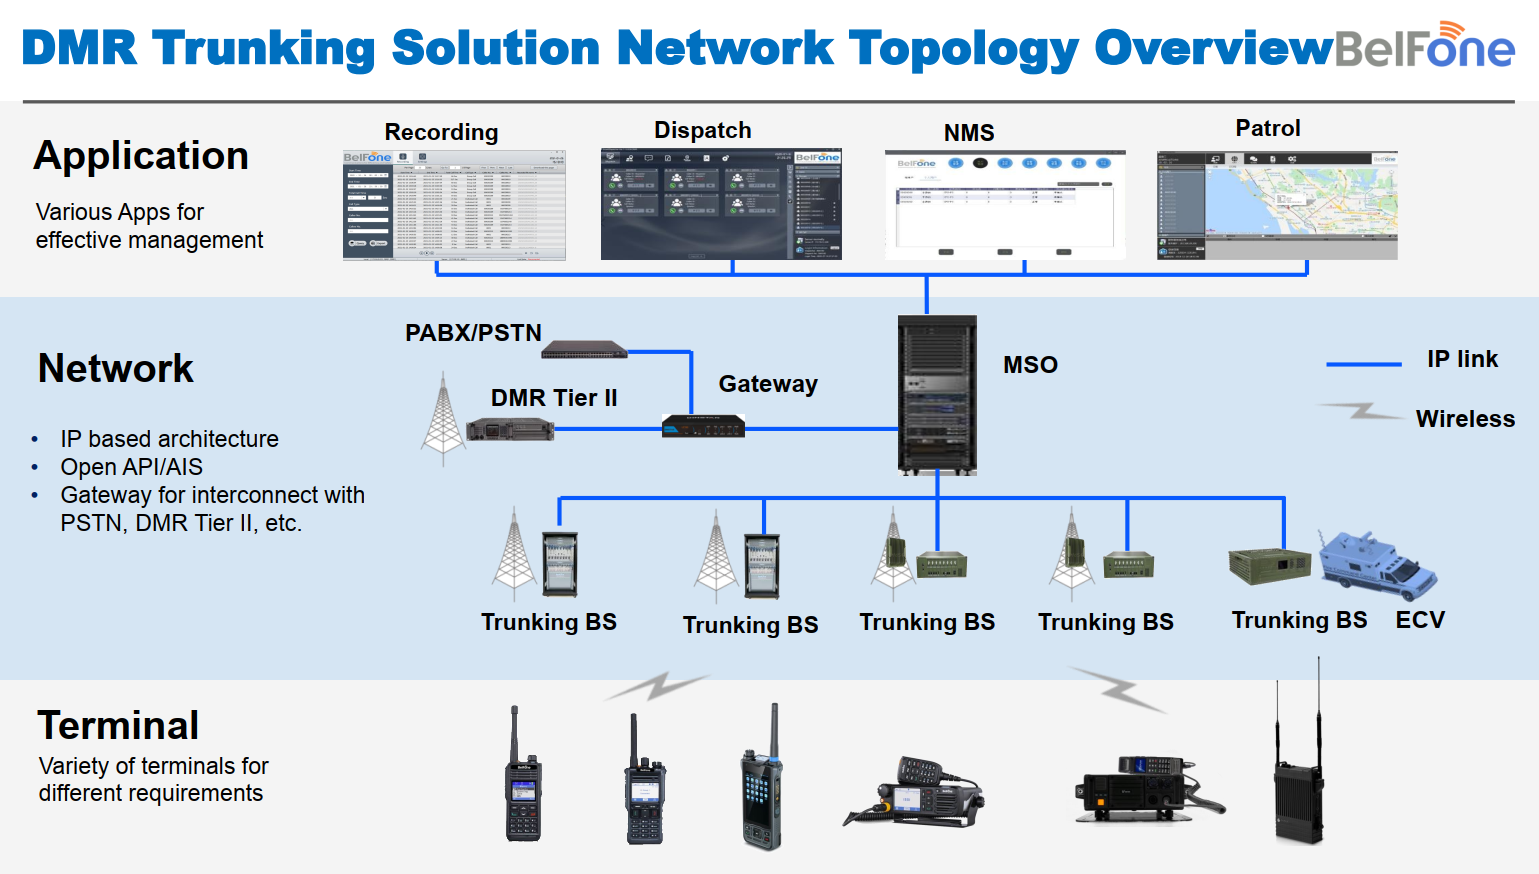 DMR Trunking Solution Network Topology Overview